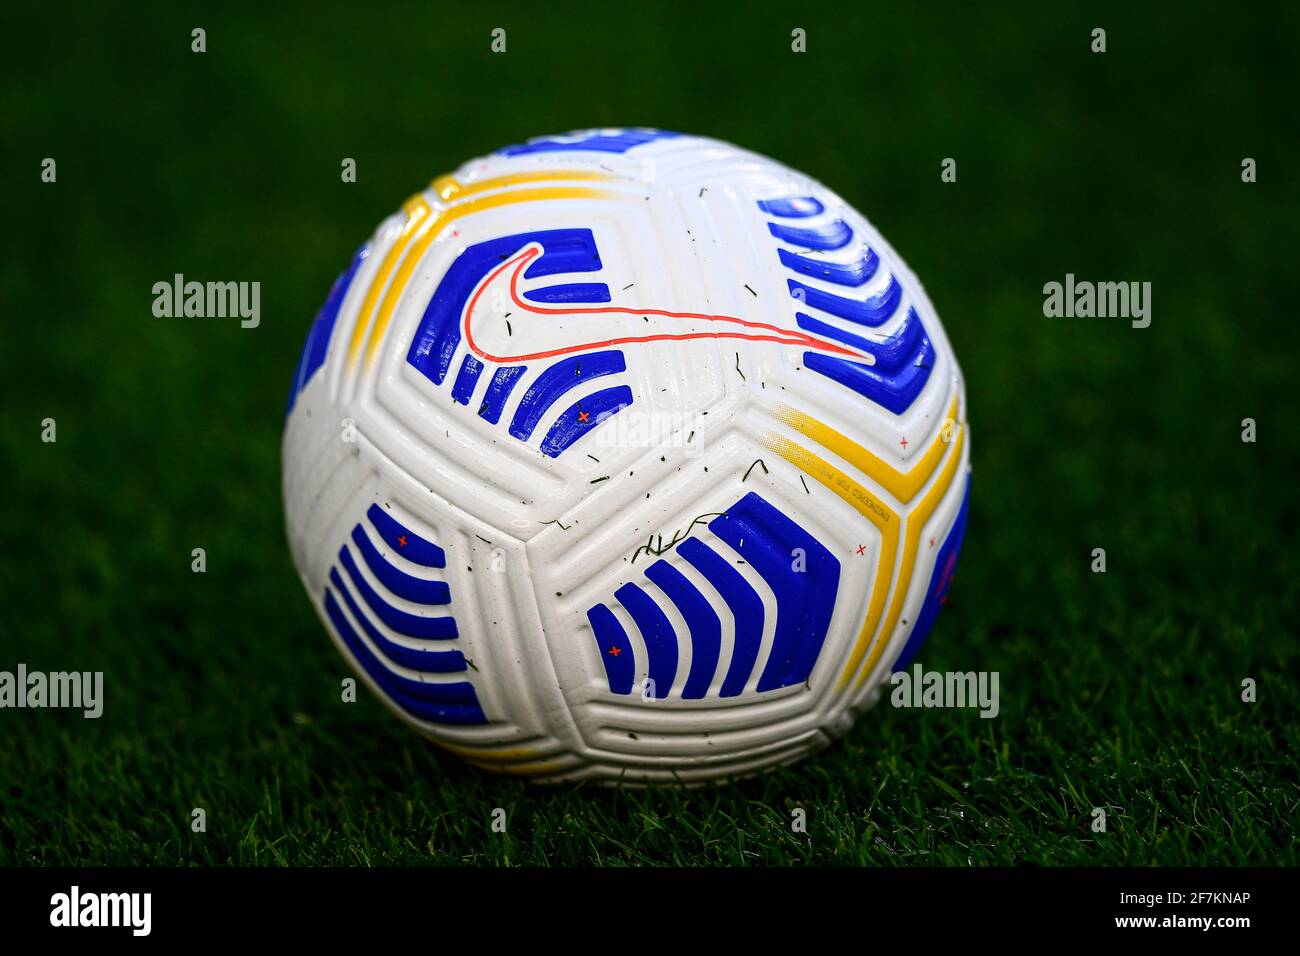 Turin, Italy - 07 April, 2021: Official Serie A match ball 'Nike Flight' is  seen prior to the Serie A football match between Juventus FC and SSC Napoli.  Juventus FC won 2-1